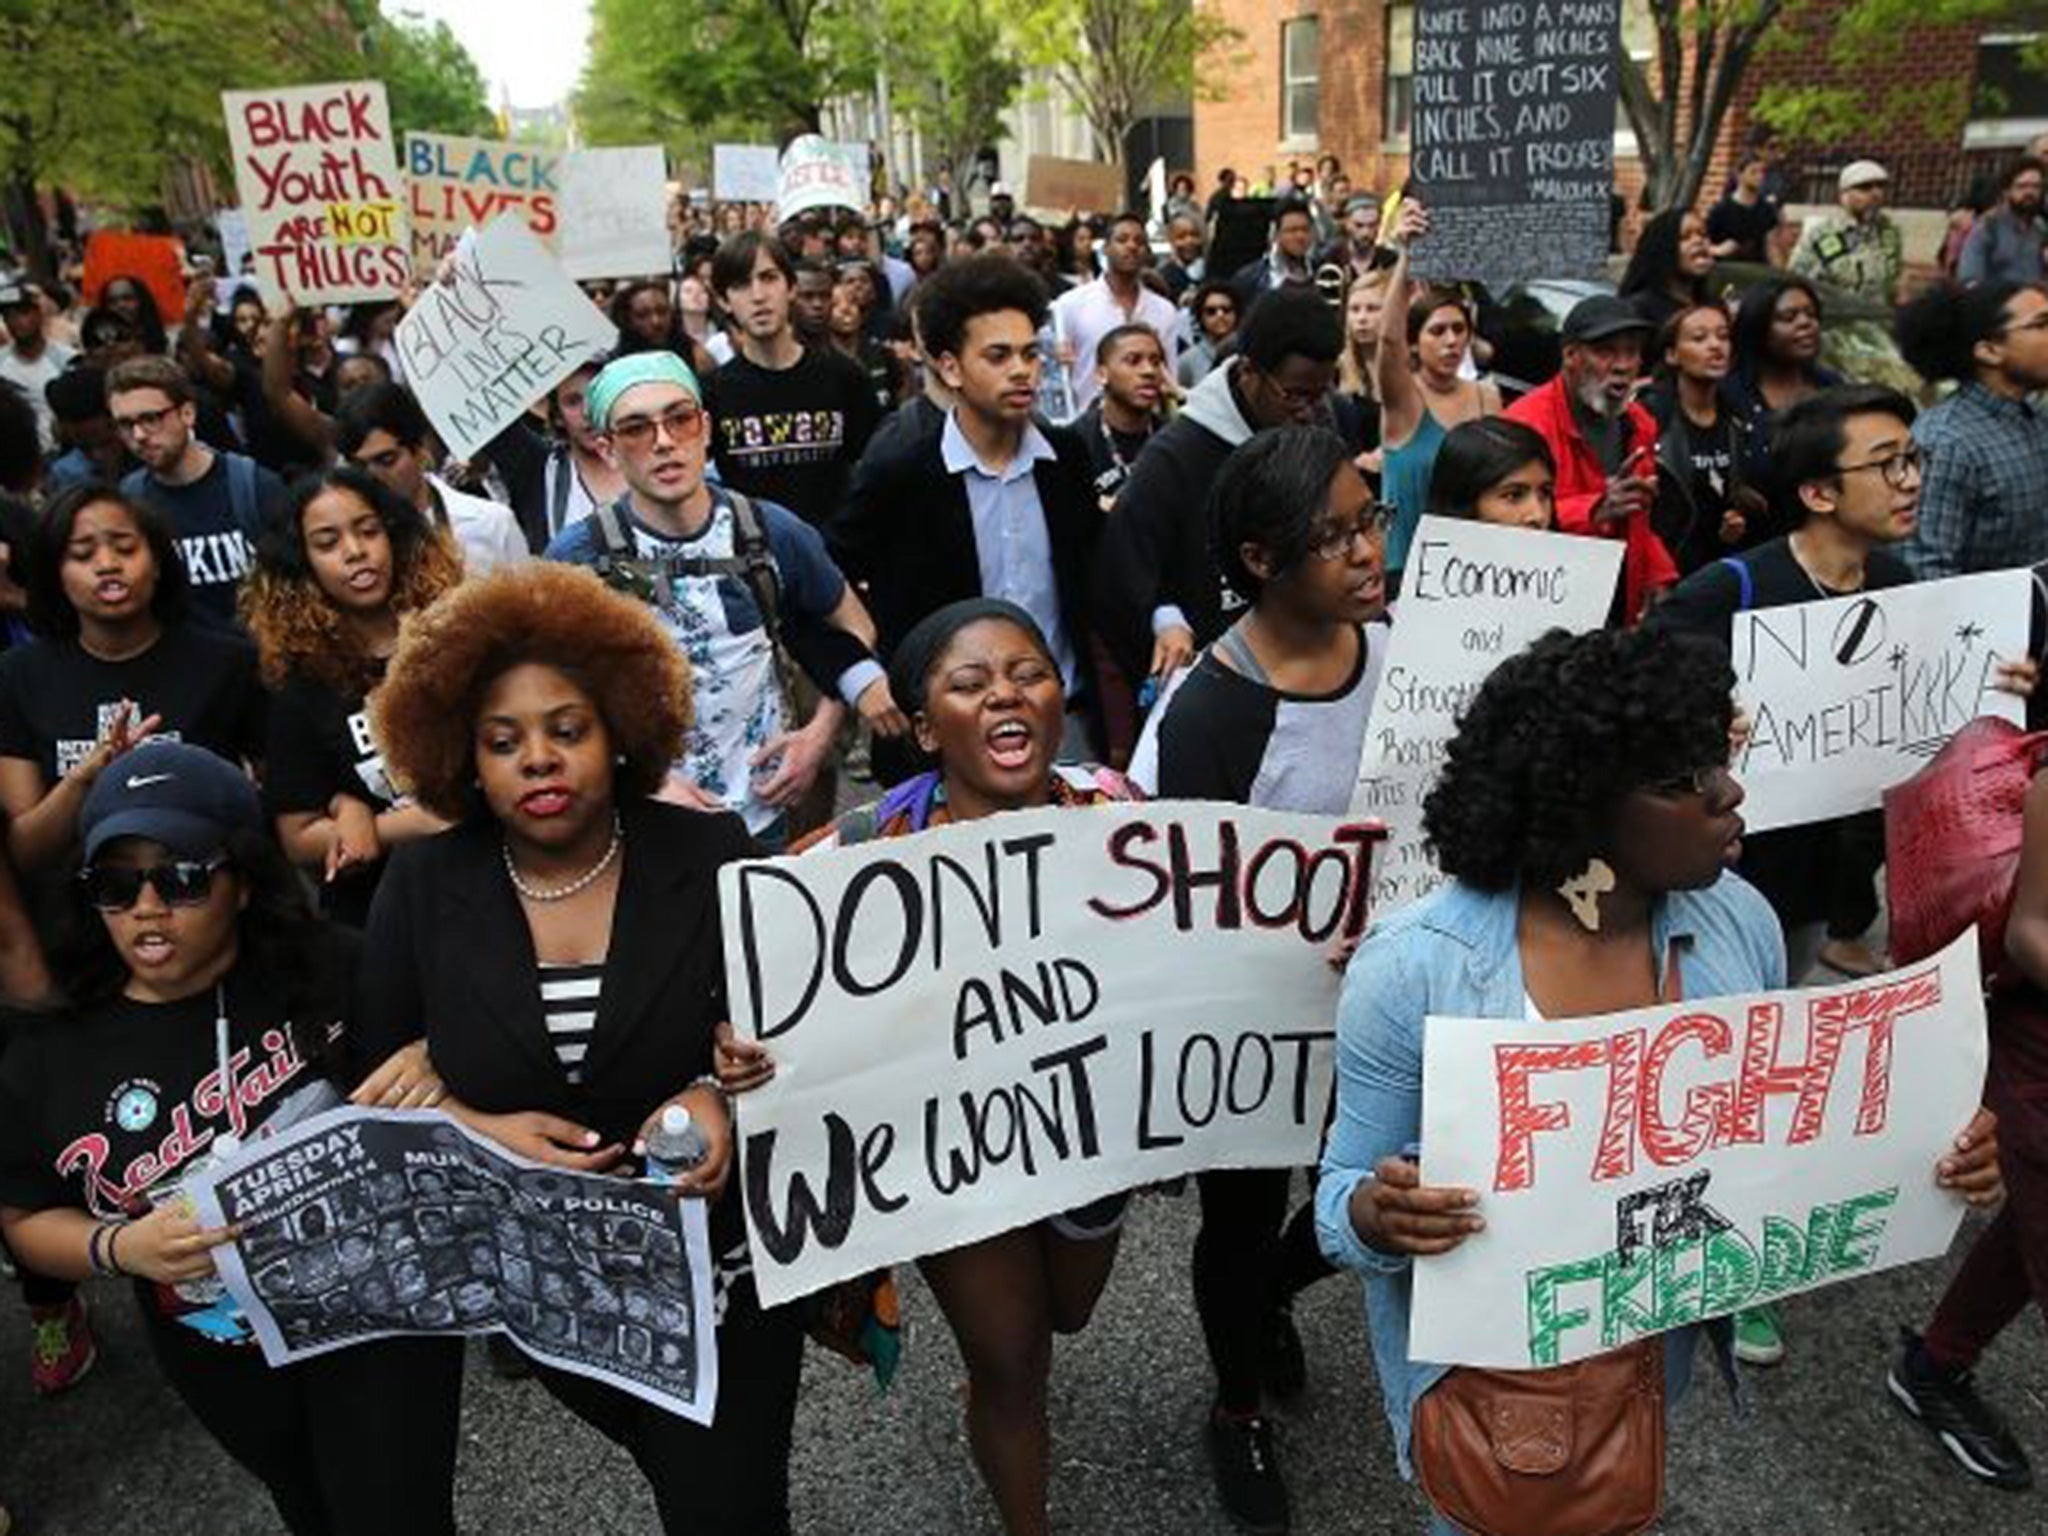 One of last month's protests after the death of Freddie Gray